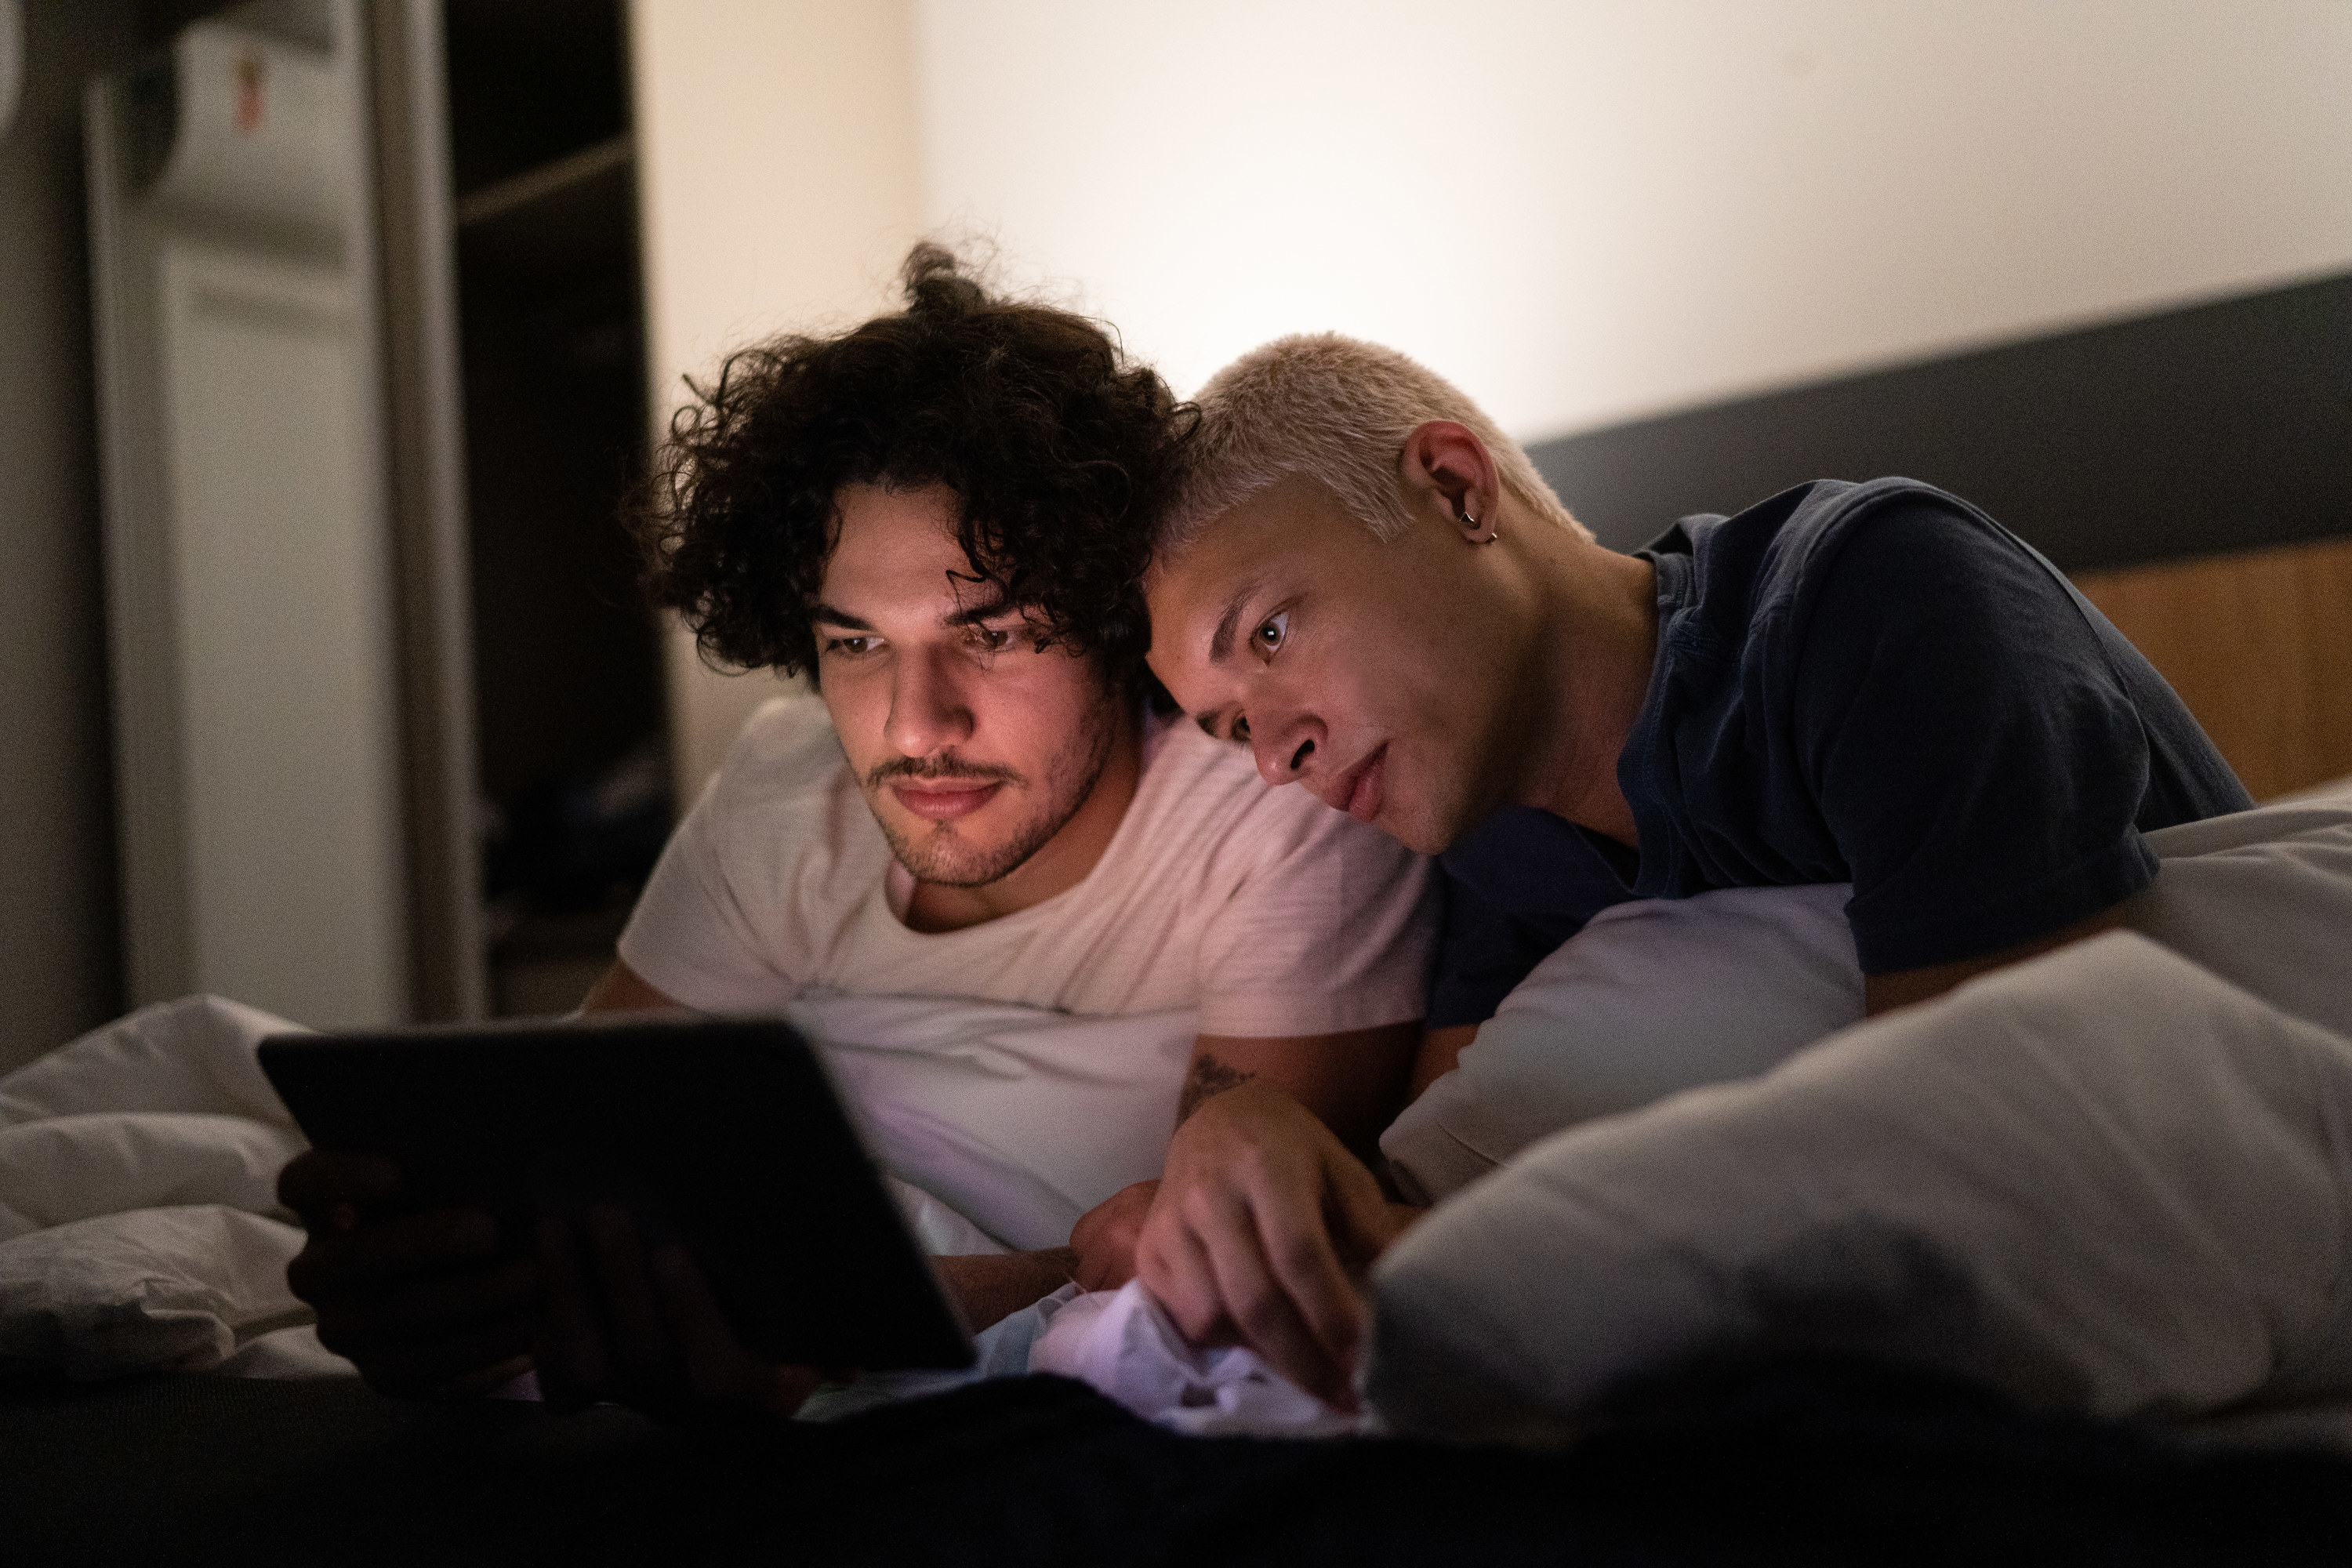 Two men watching TV together on a tablet